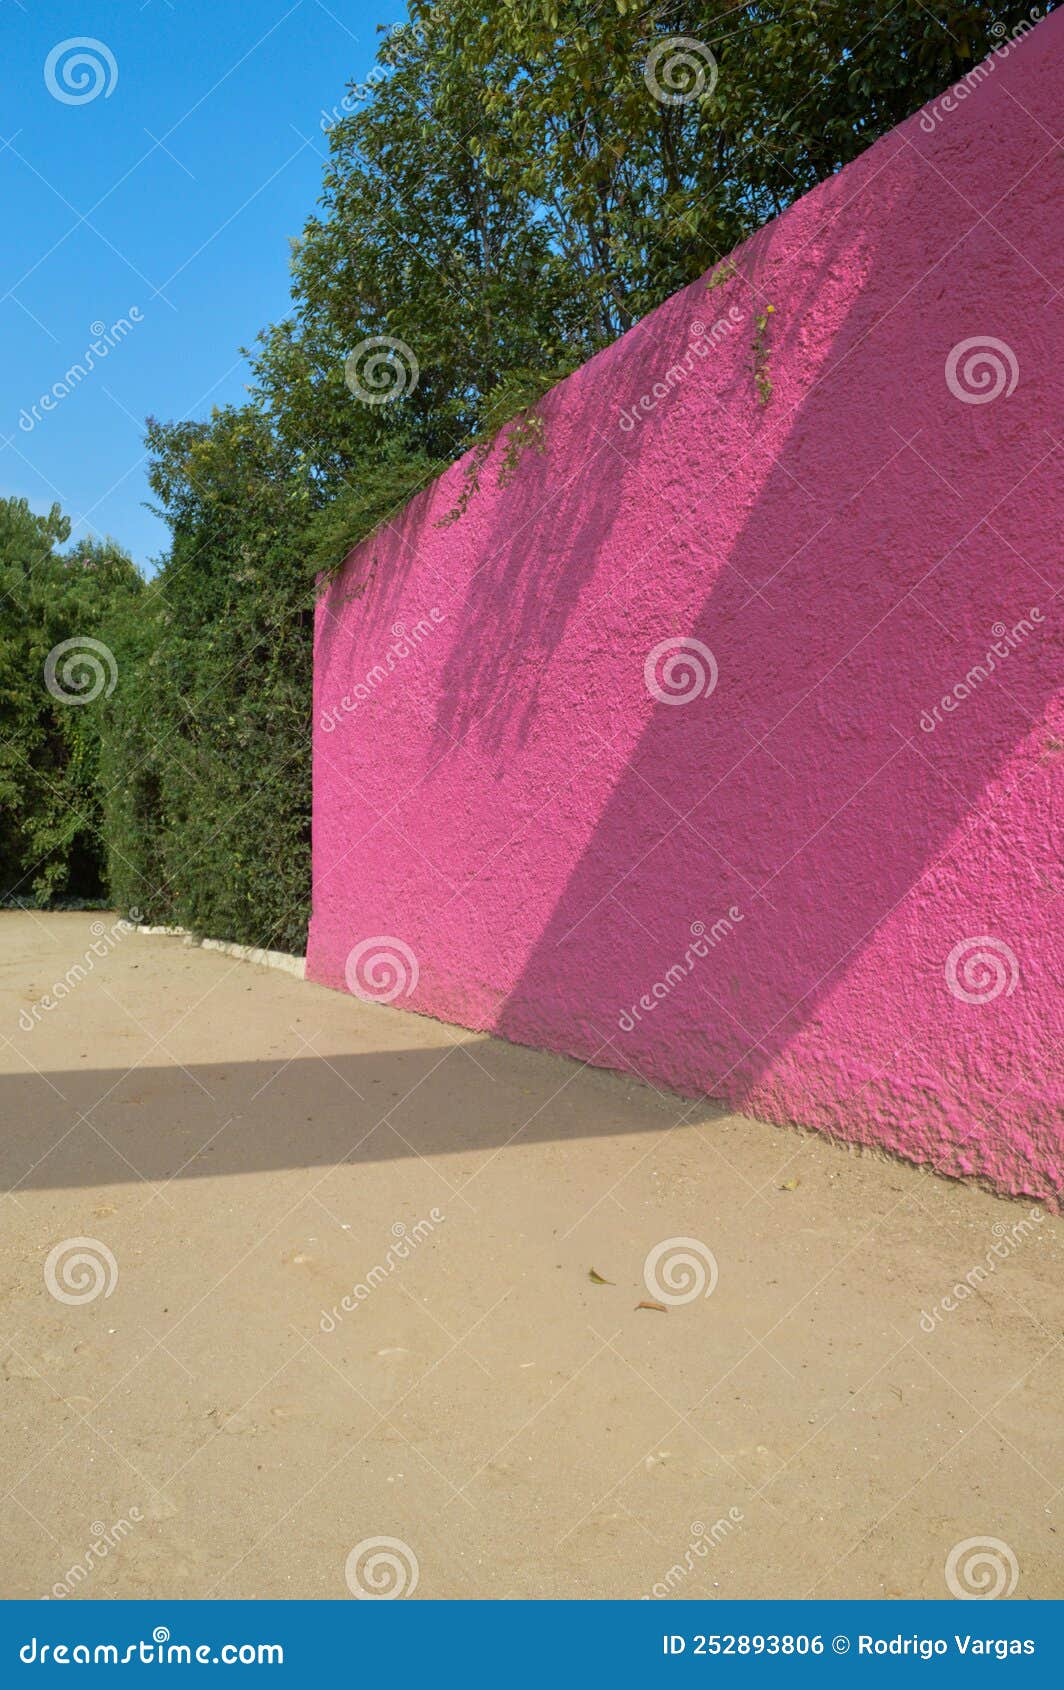 luis barragan`s cuadra san cristobal pink wall, endemic vegetation and sandy ground in the background